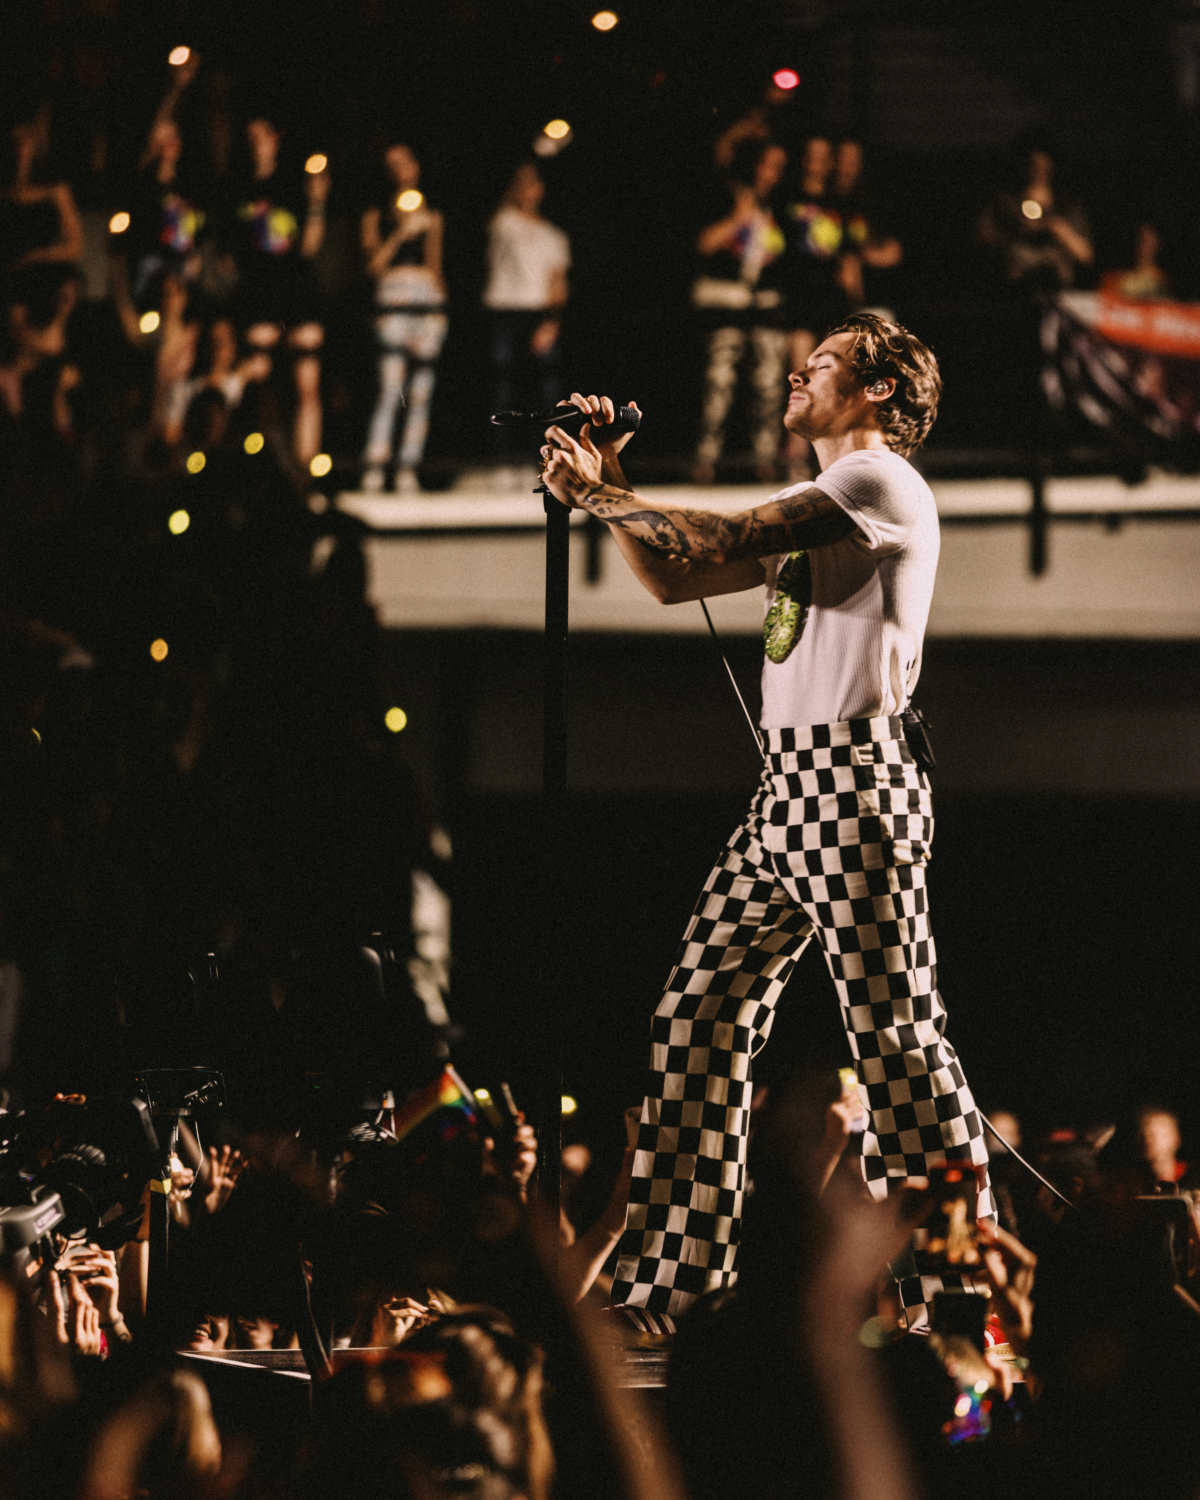 Harry Styles Wearing Gucci To Perform On Stage During The ‘Love On Tour’ Tour